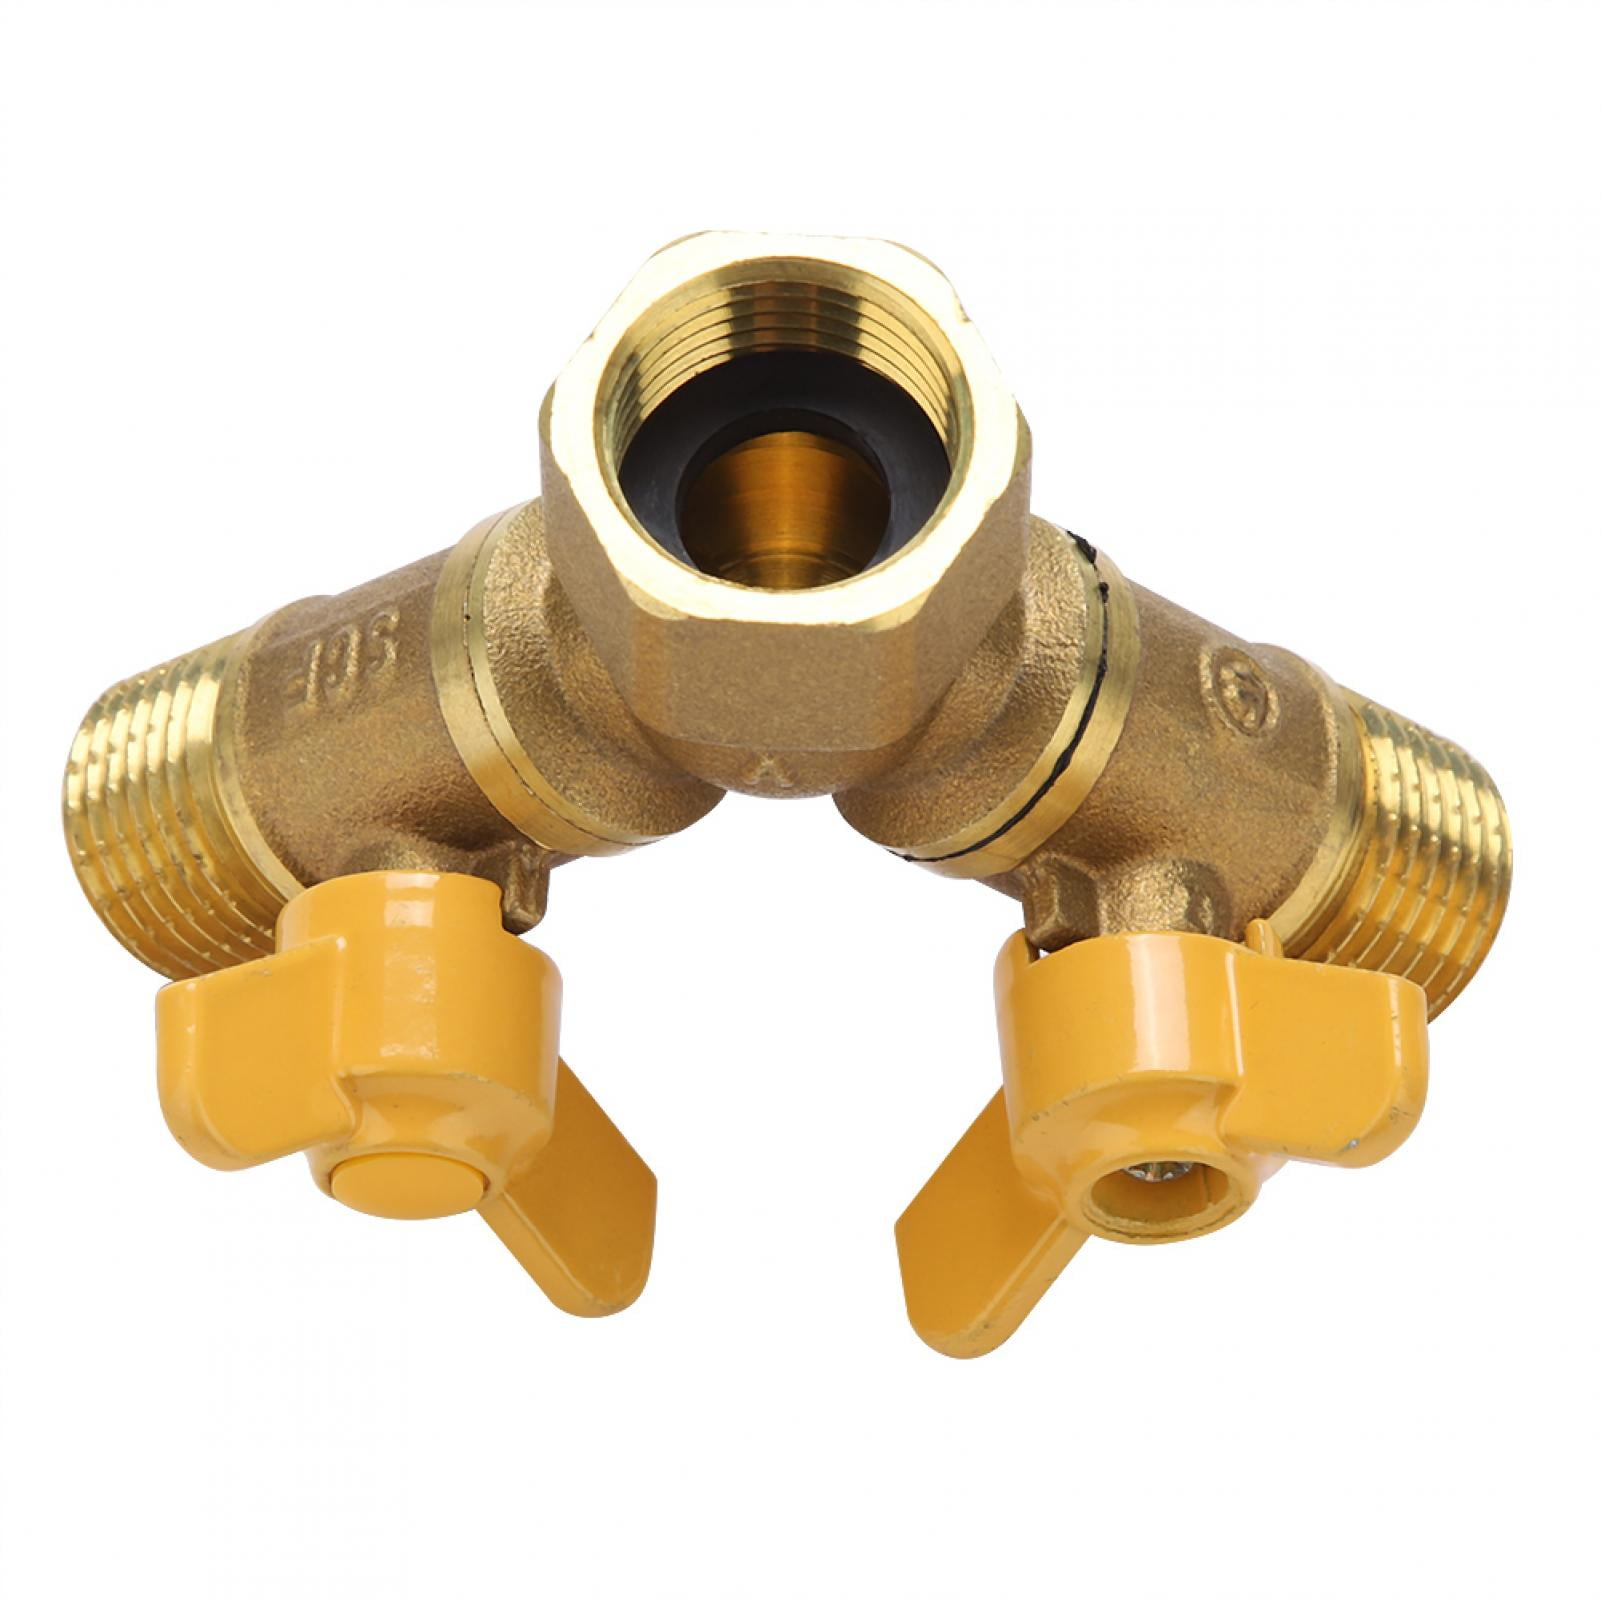 Details about   1X 2 Way 1/2 "Faucet Adapter Outside Garden Irrigation Tap Adapter and 